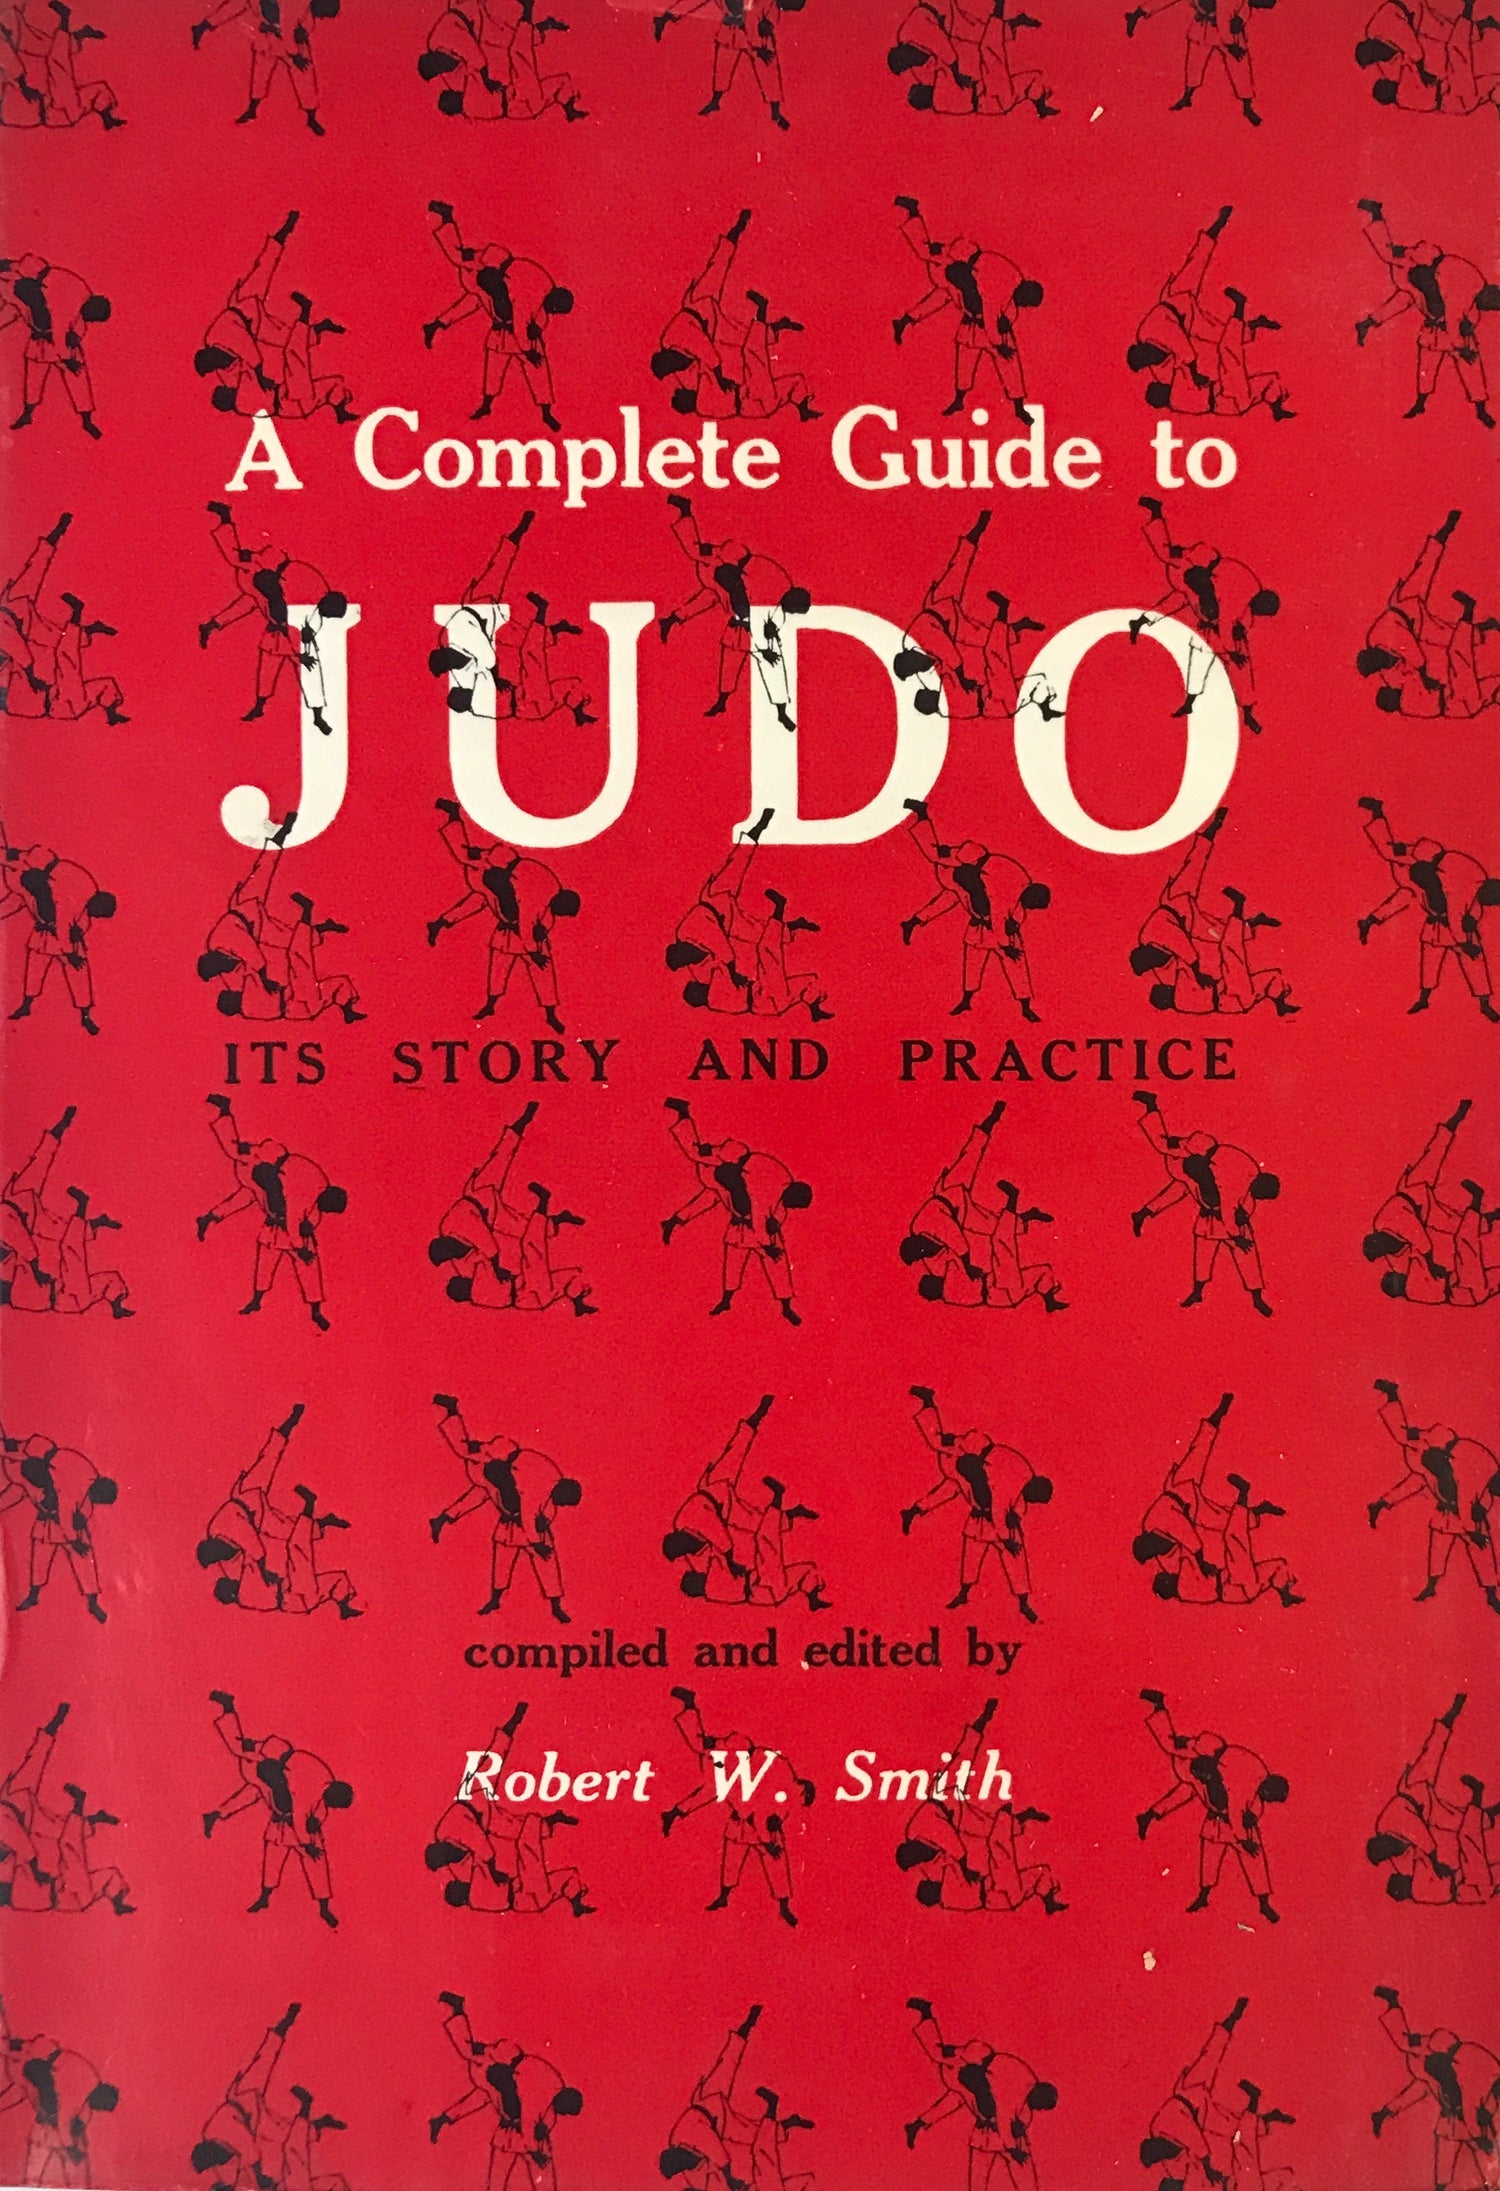 A Complete Guide To Judo: Its Story And Practice Book by Robert Smith (Hardcover) (Preowned) - Budovideos Inc